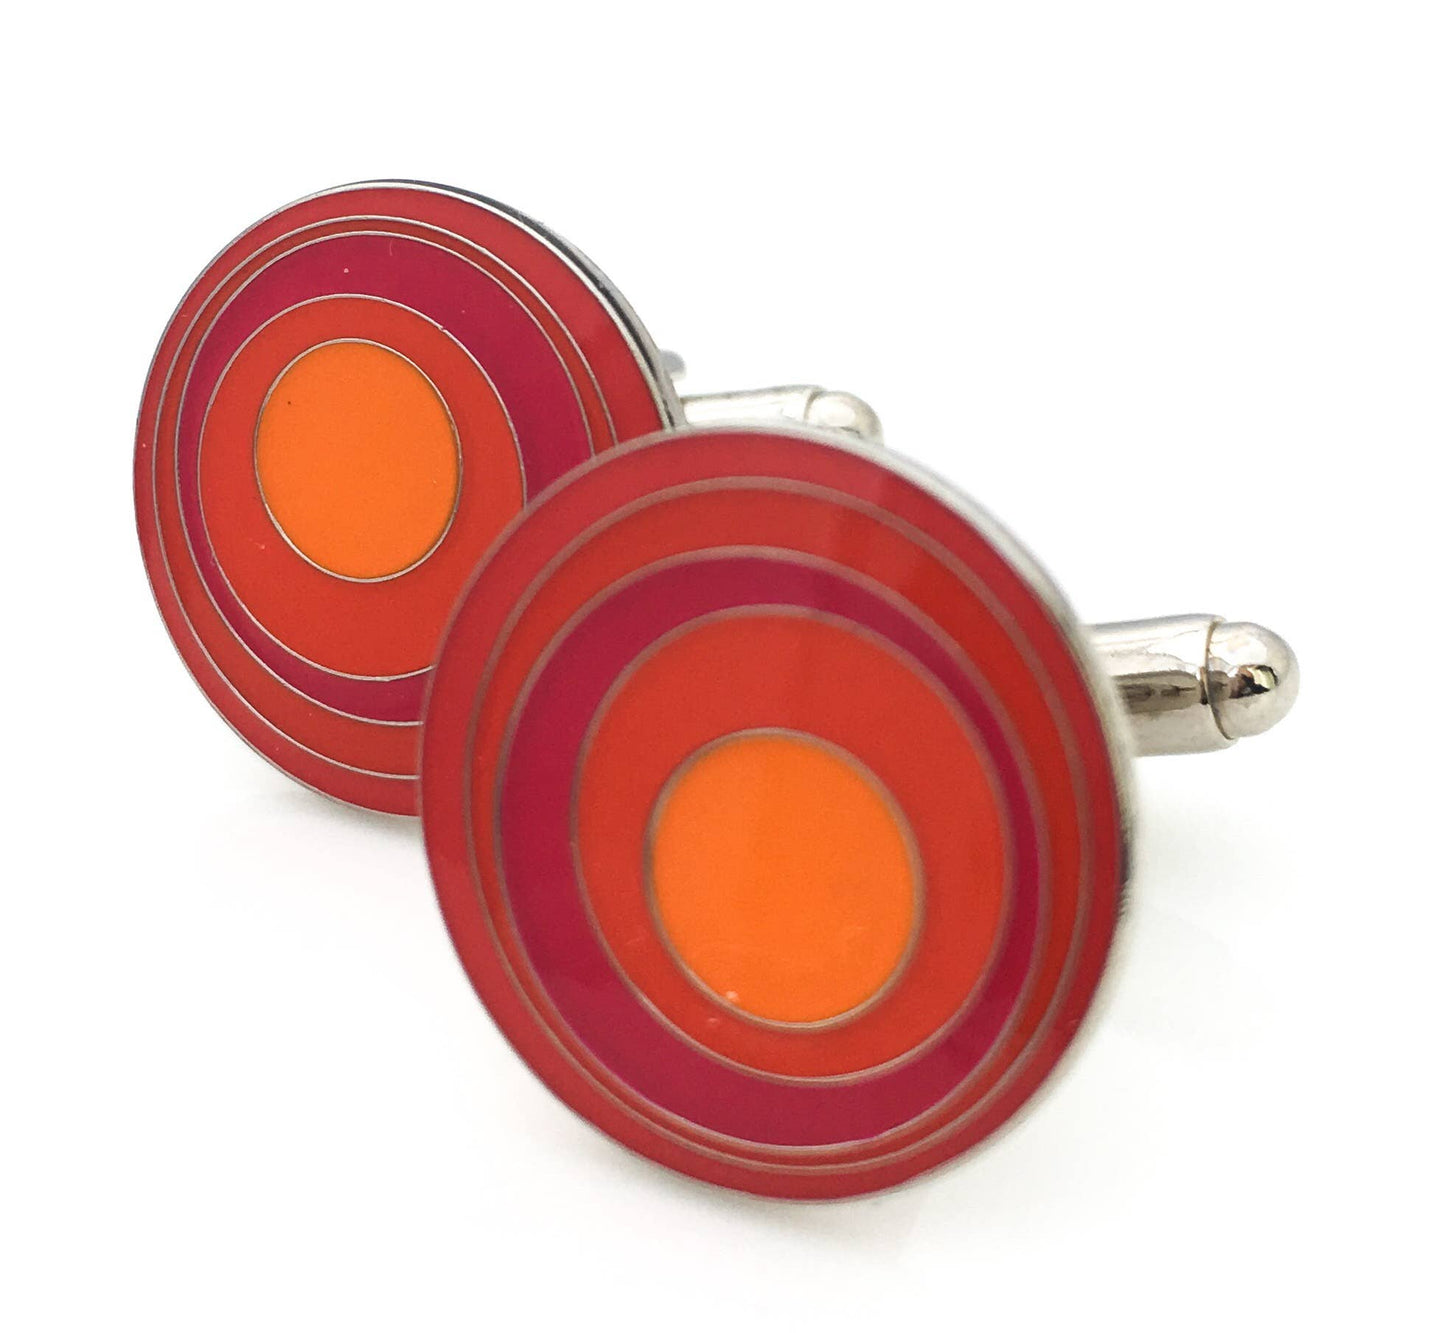 Round cufflinks with circles within circles in oranges